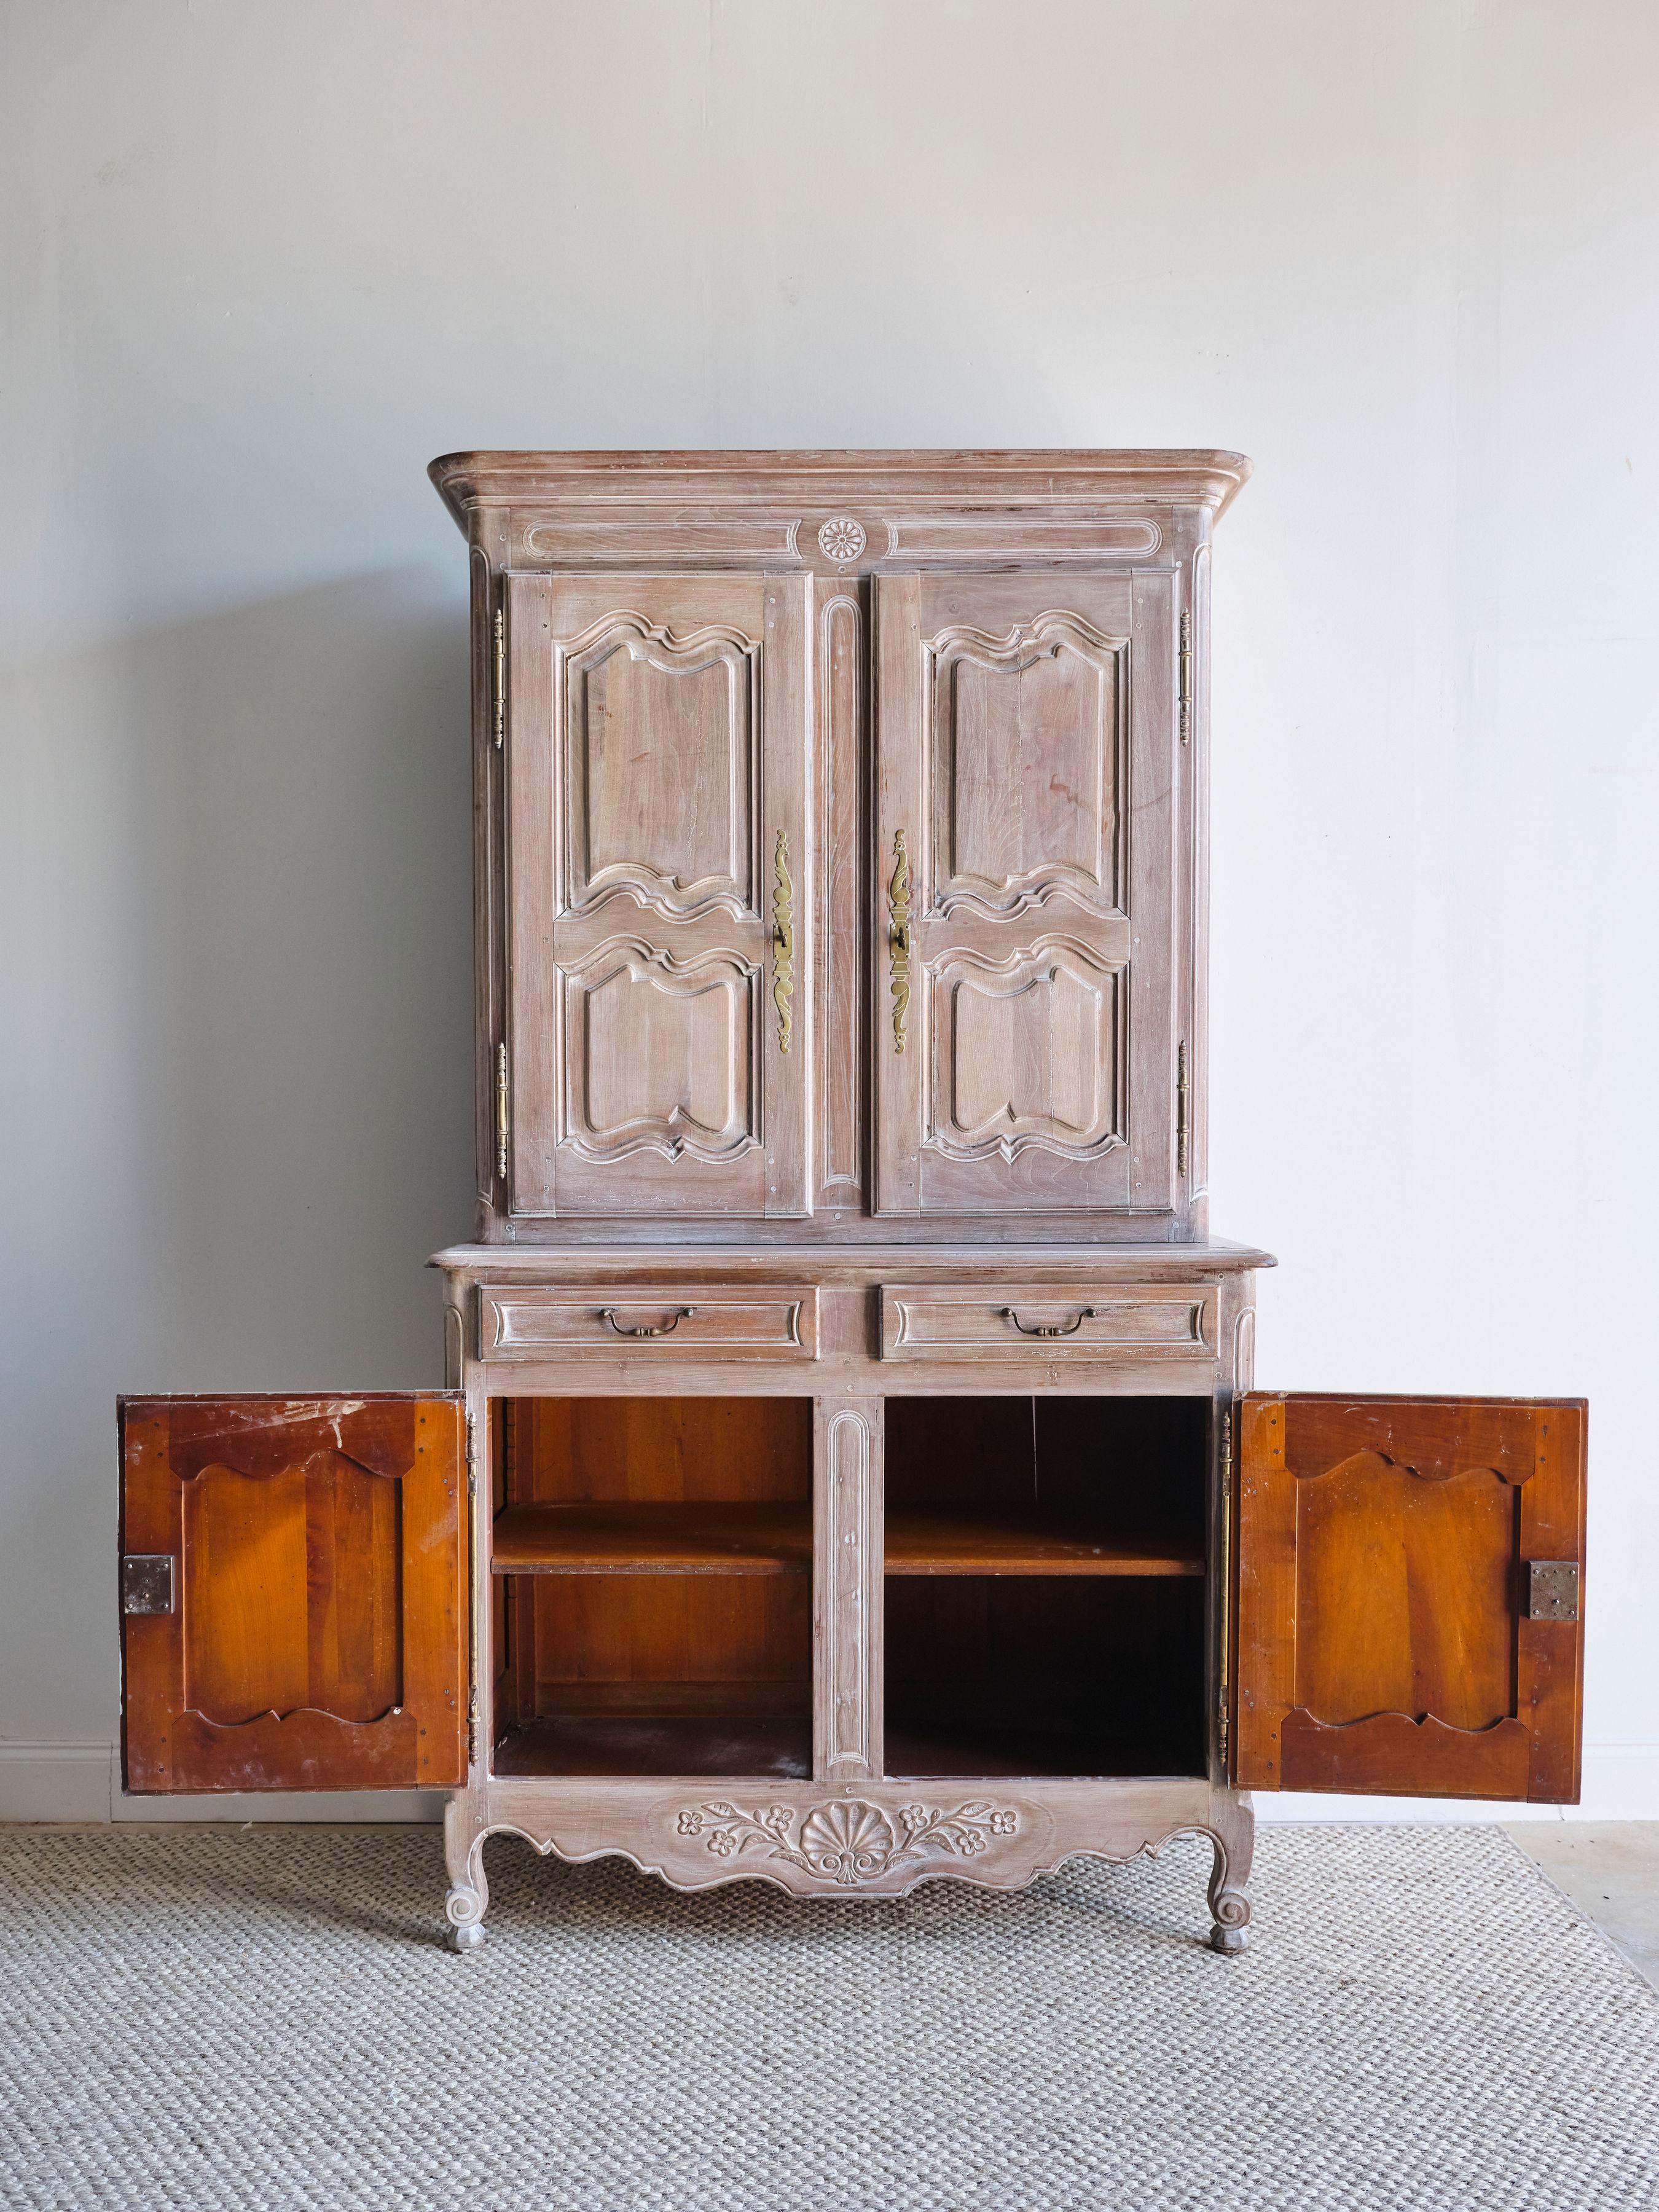 What a beautiful and unique cabinet this is! This lime washed buffet deux corps has so many lovely details that set it apart. The top part of the cabinet has two interior shelves and the bottom half has one interior shelf. This cabinet comes with